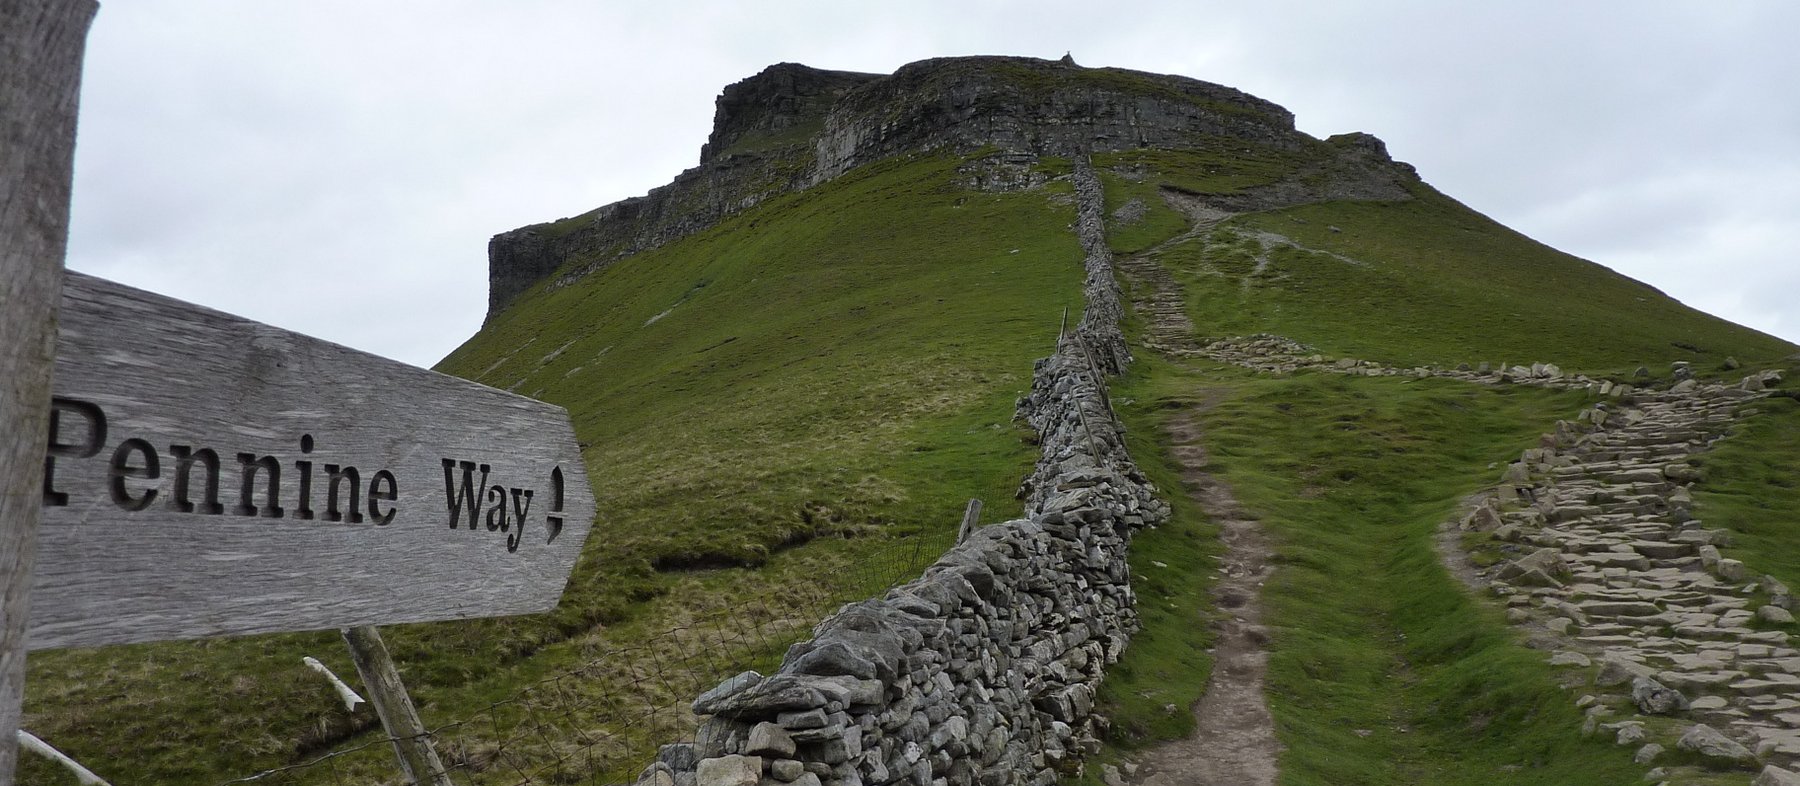 The ascent of Pen-y-ghent is steep, but short